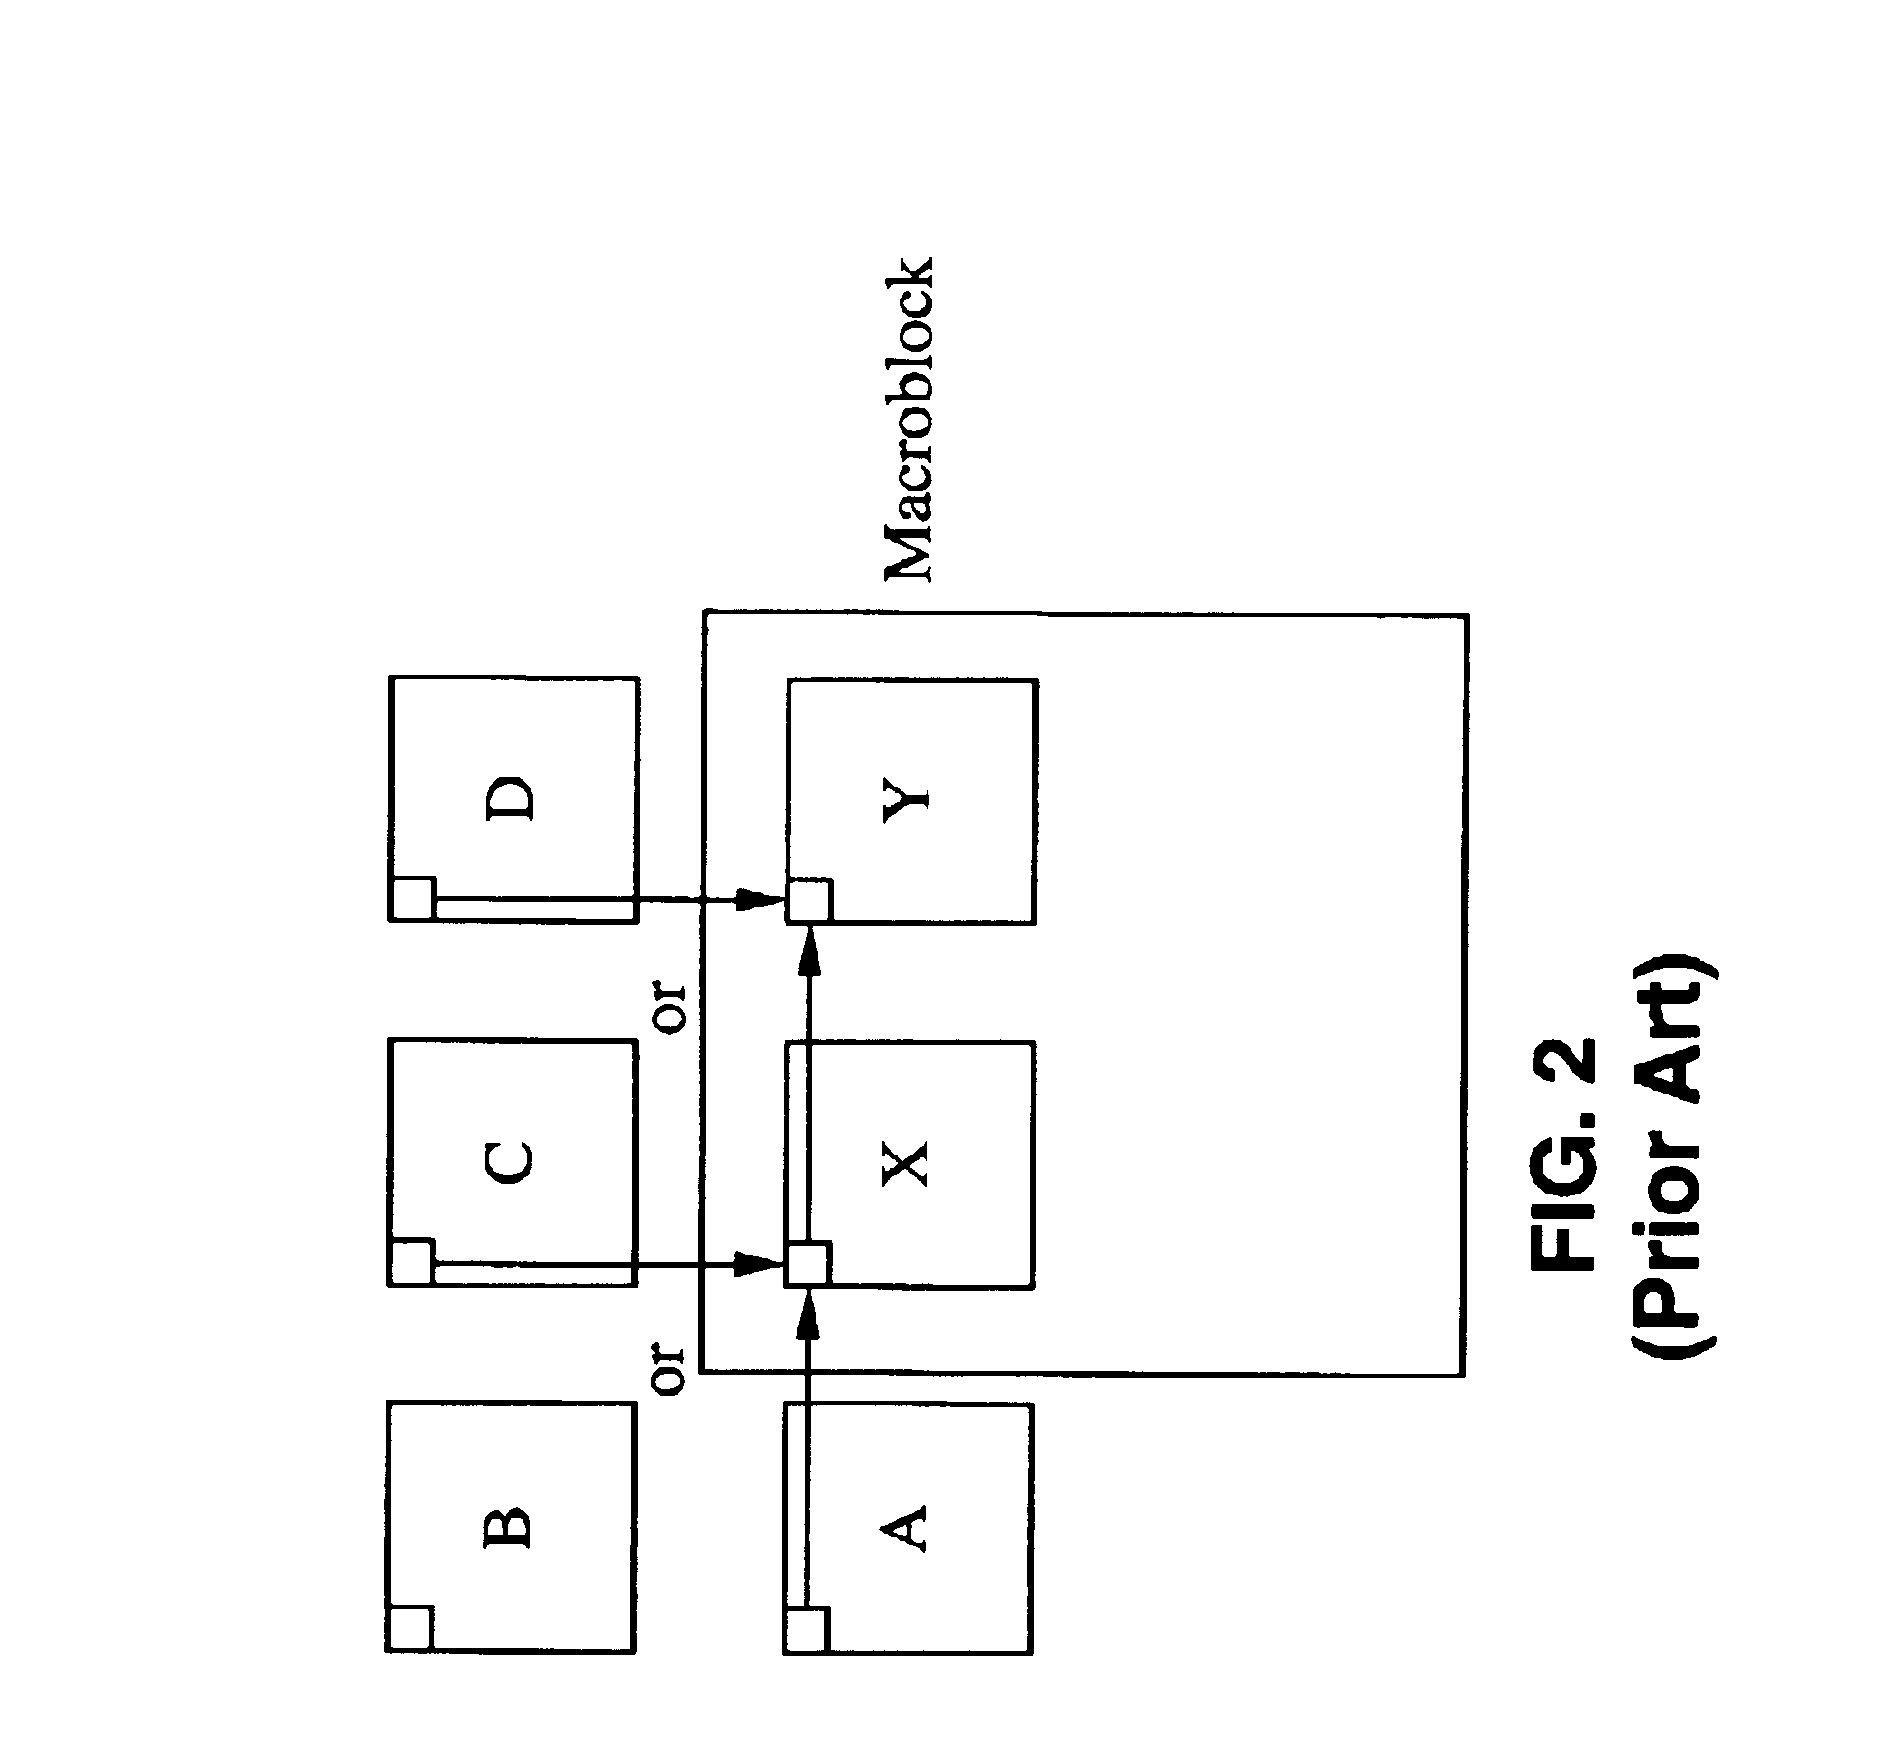 Method of real time MPEG-4 texture decoding for a multiprocessor environment